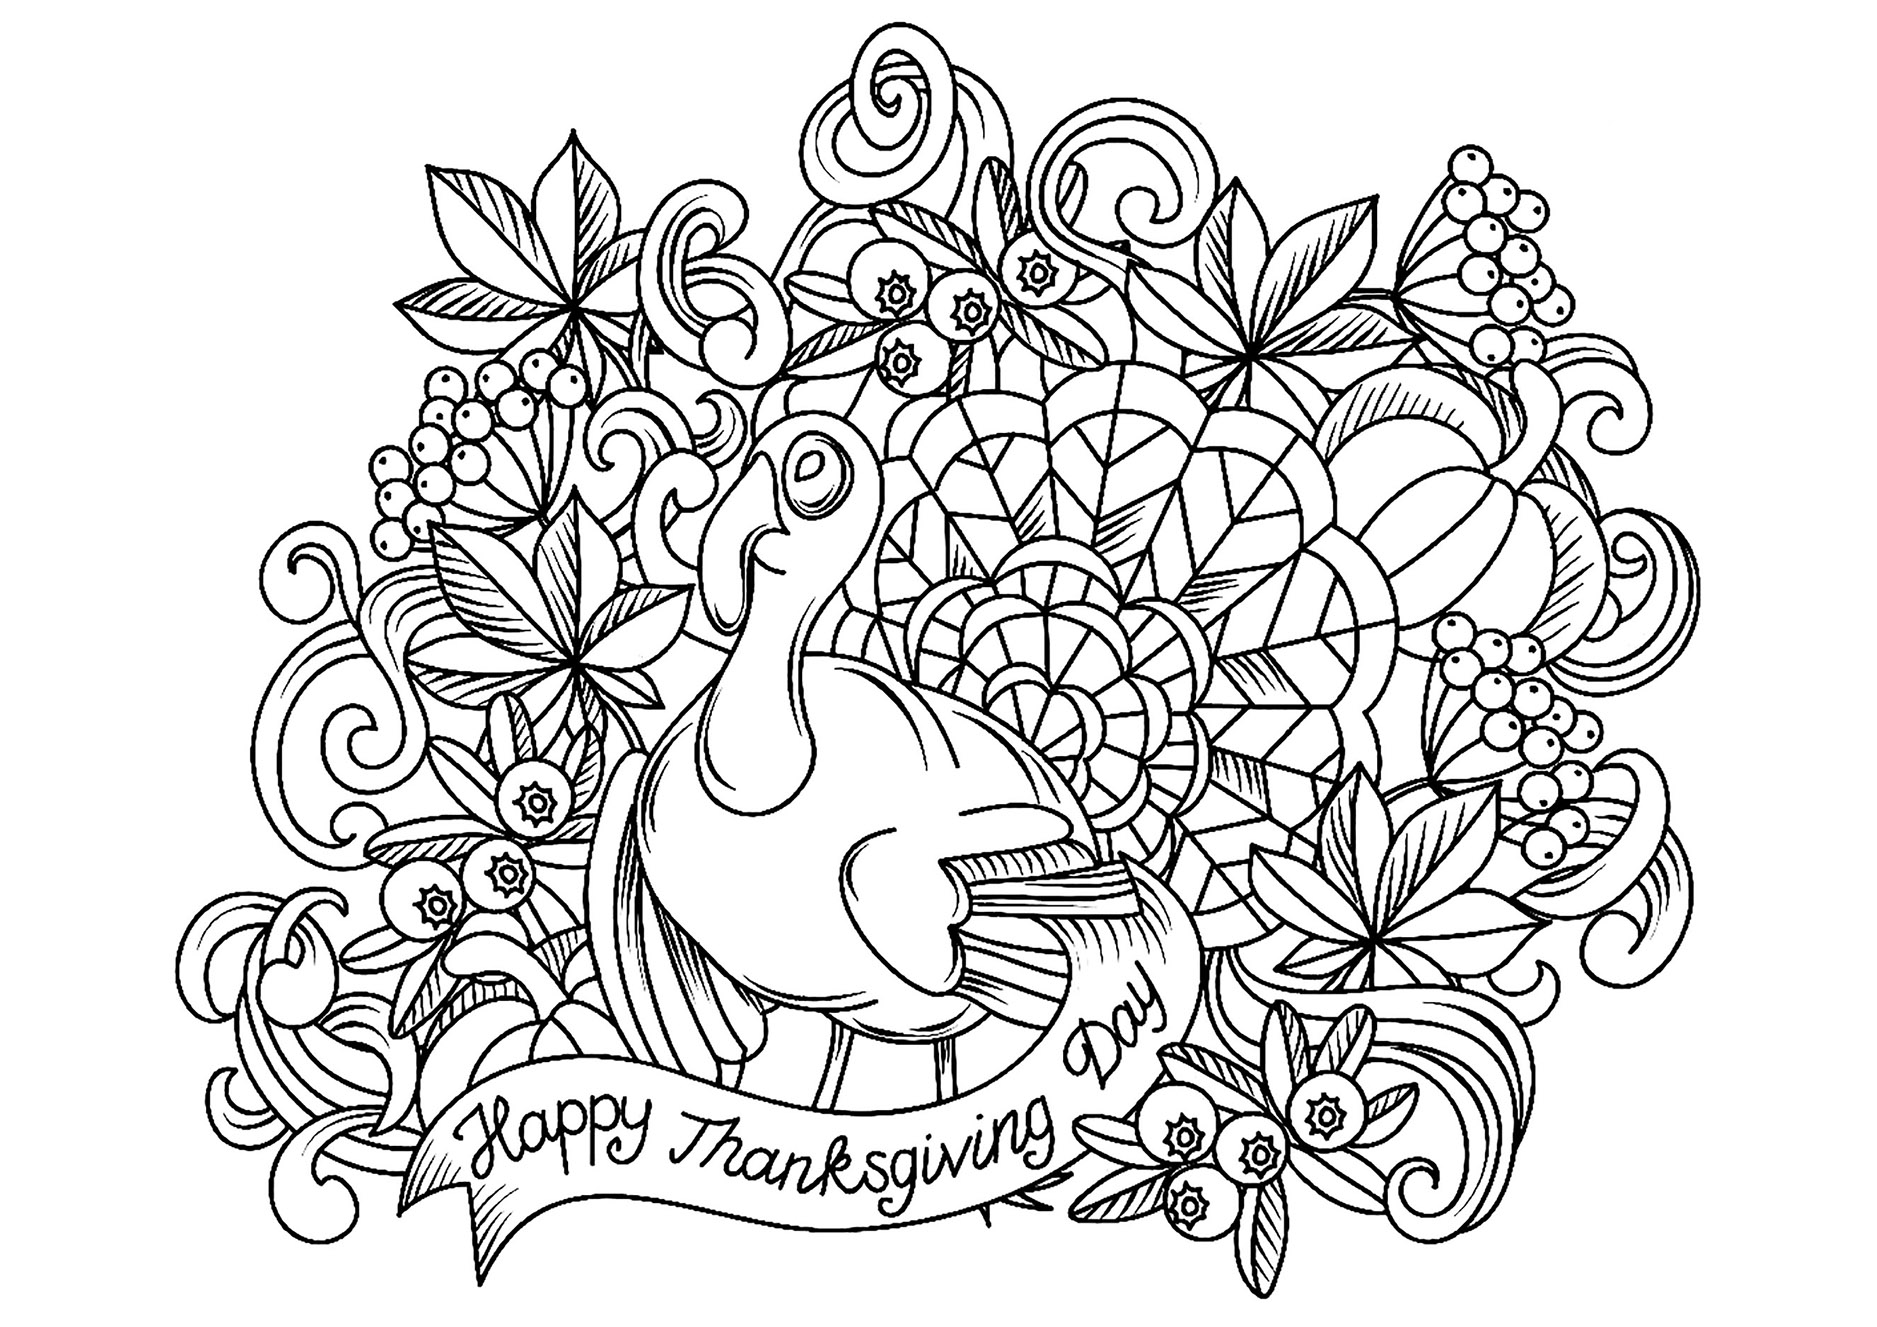 Thanksgiving coloring pages with turkey and patterns